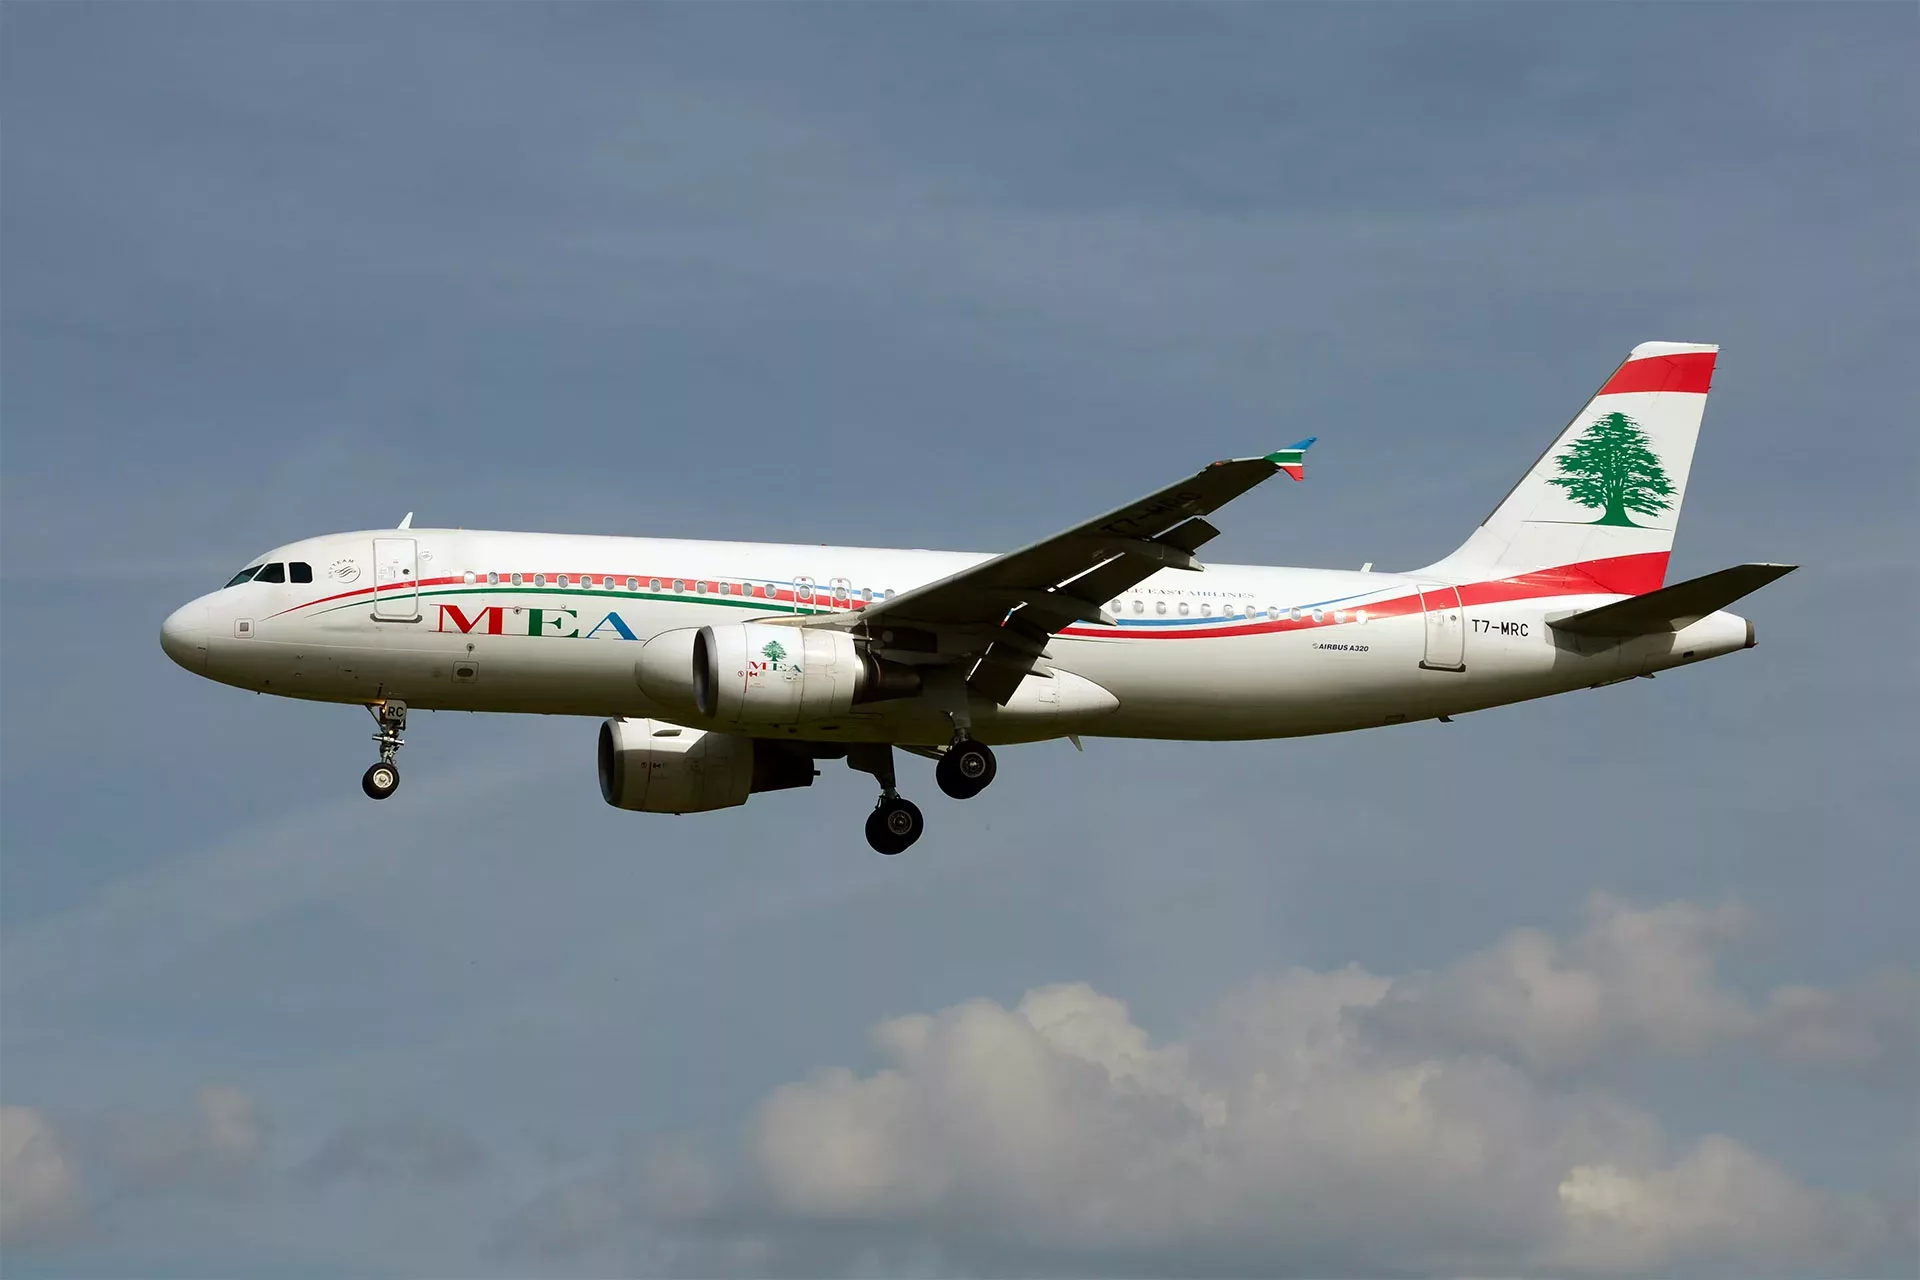 Middle East Airlines Narrowly Avoids Disaster After Flight Struck By Stray Bullet in Beirut